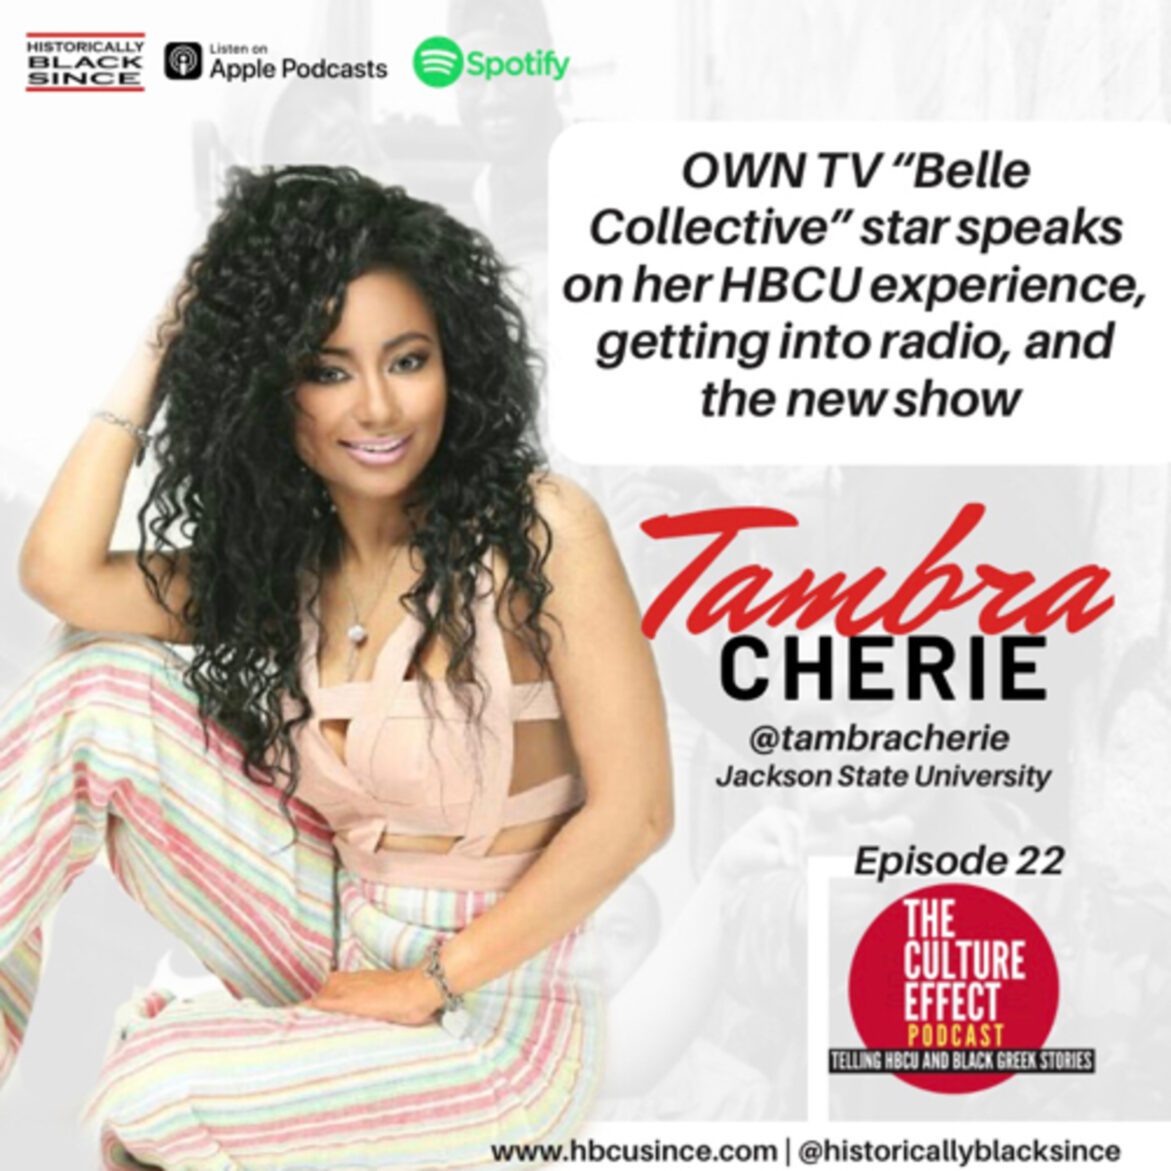 Black Podcasting - OWN TV Star Tambra Cherie Speaks on her HBCU Experience, Radio and Belle Collective